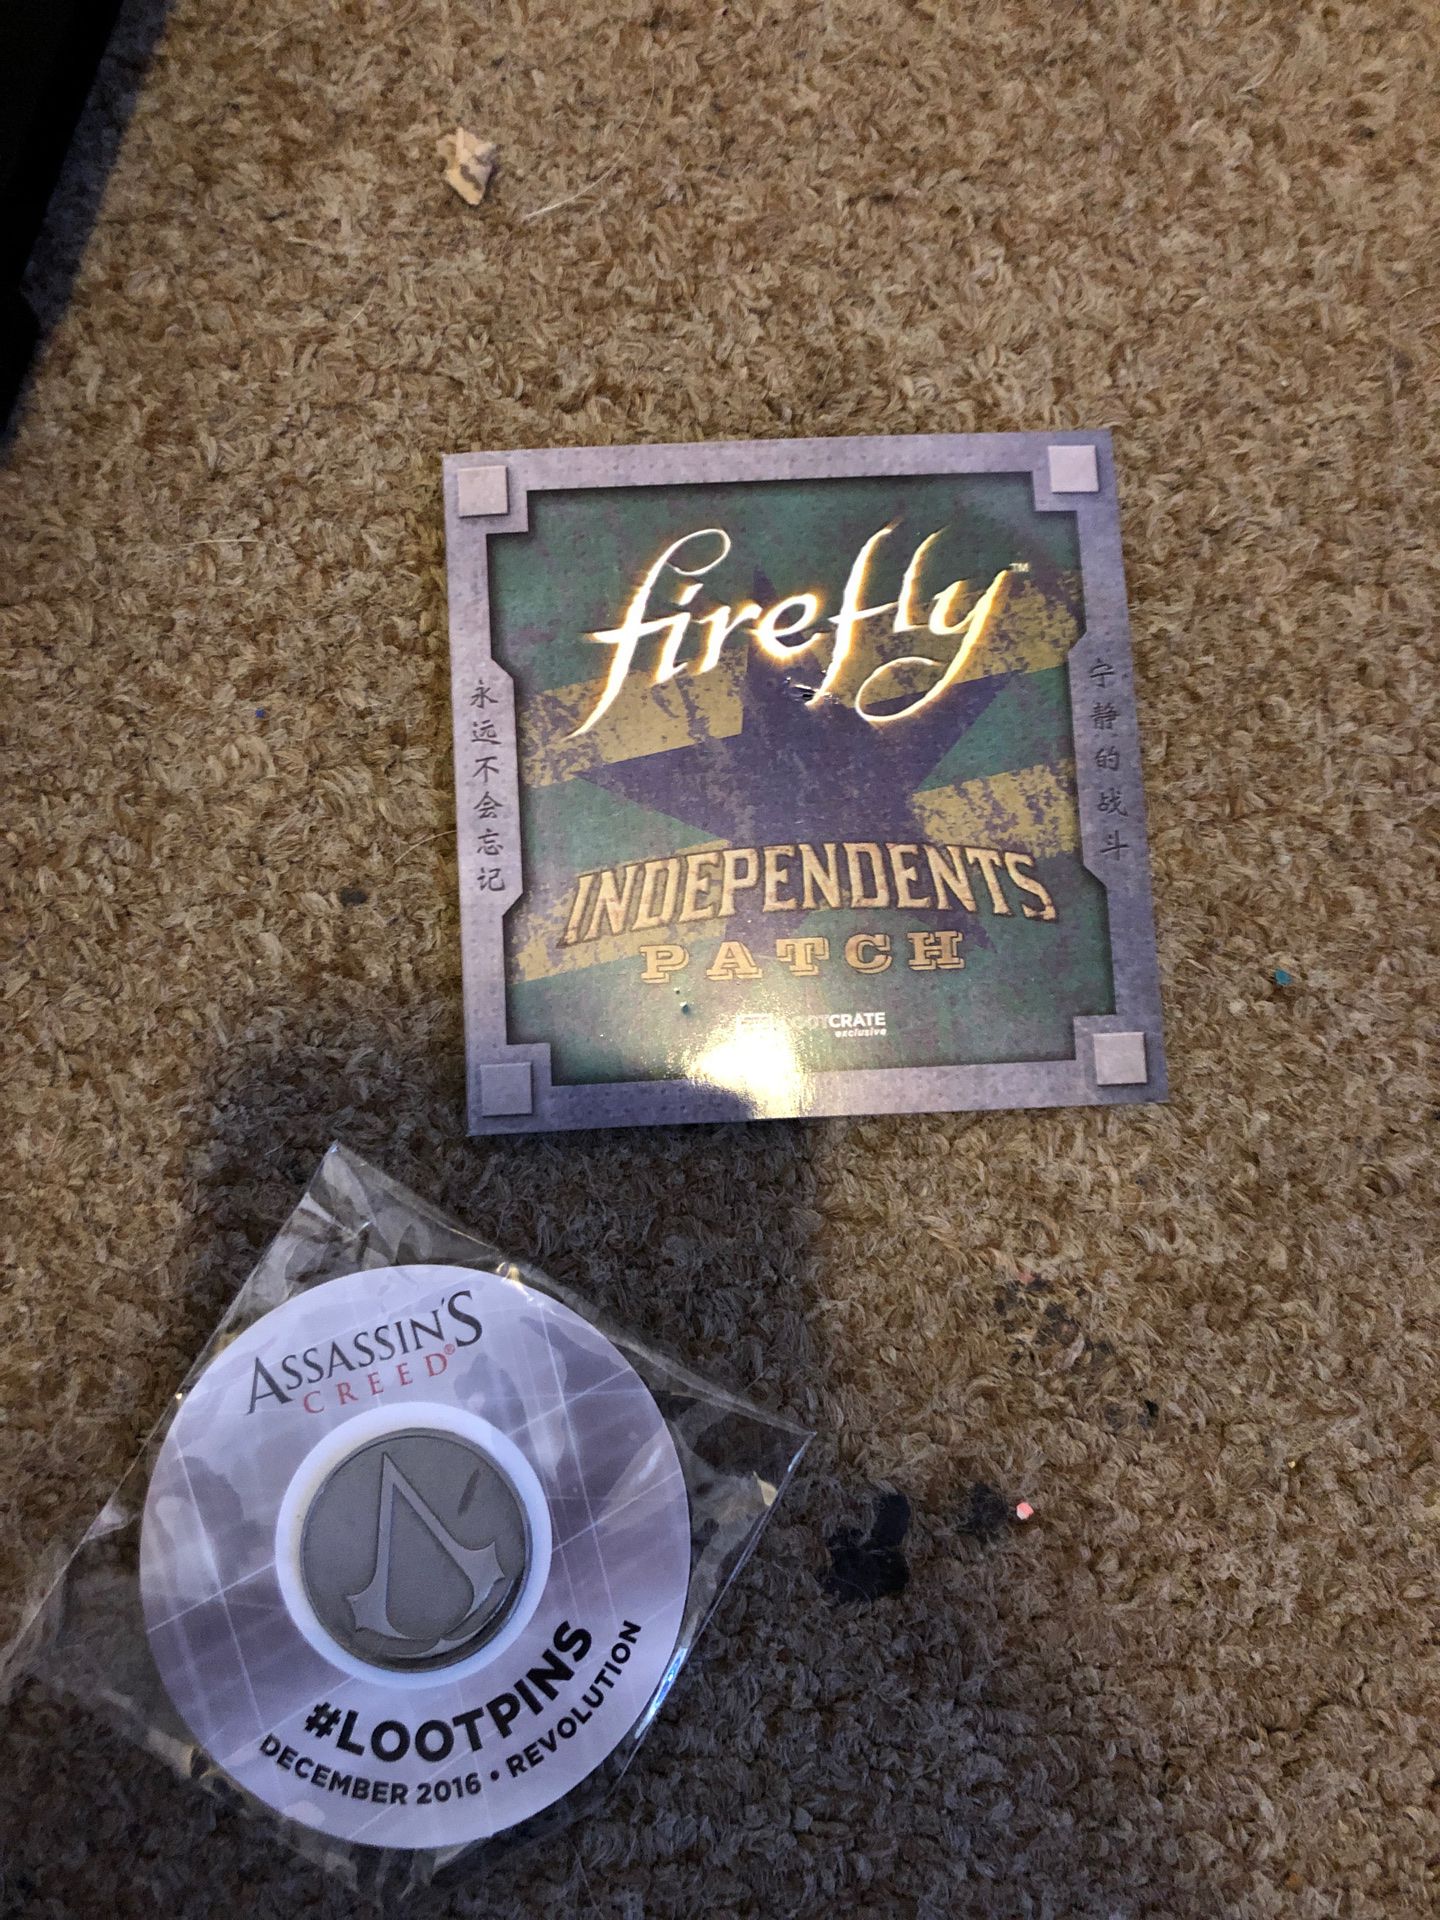 Assassins creed pin and firefly patch exclusive loot crate